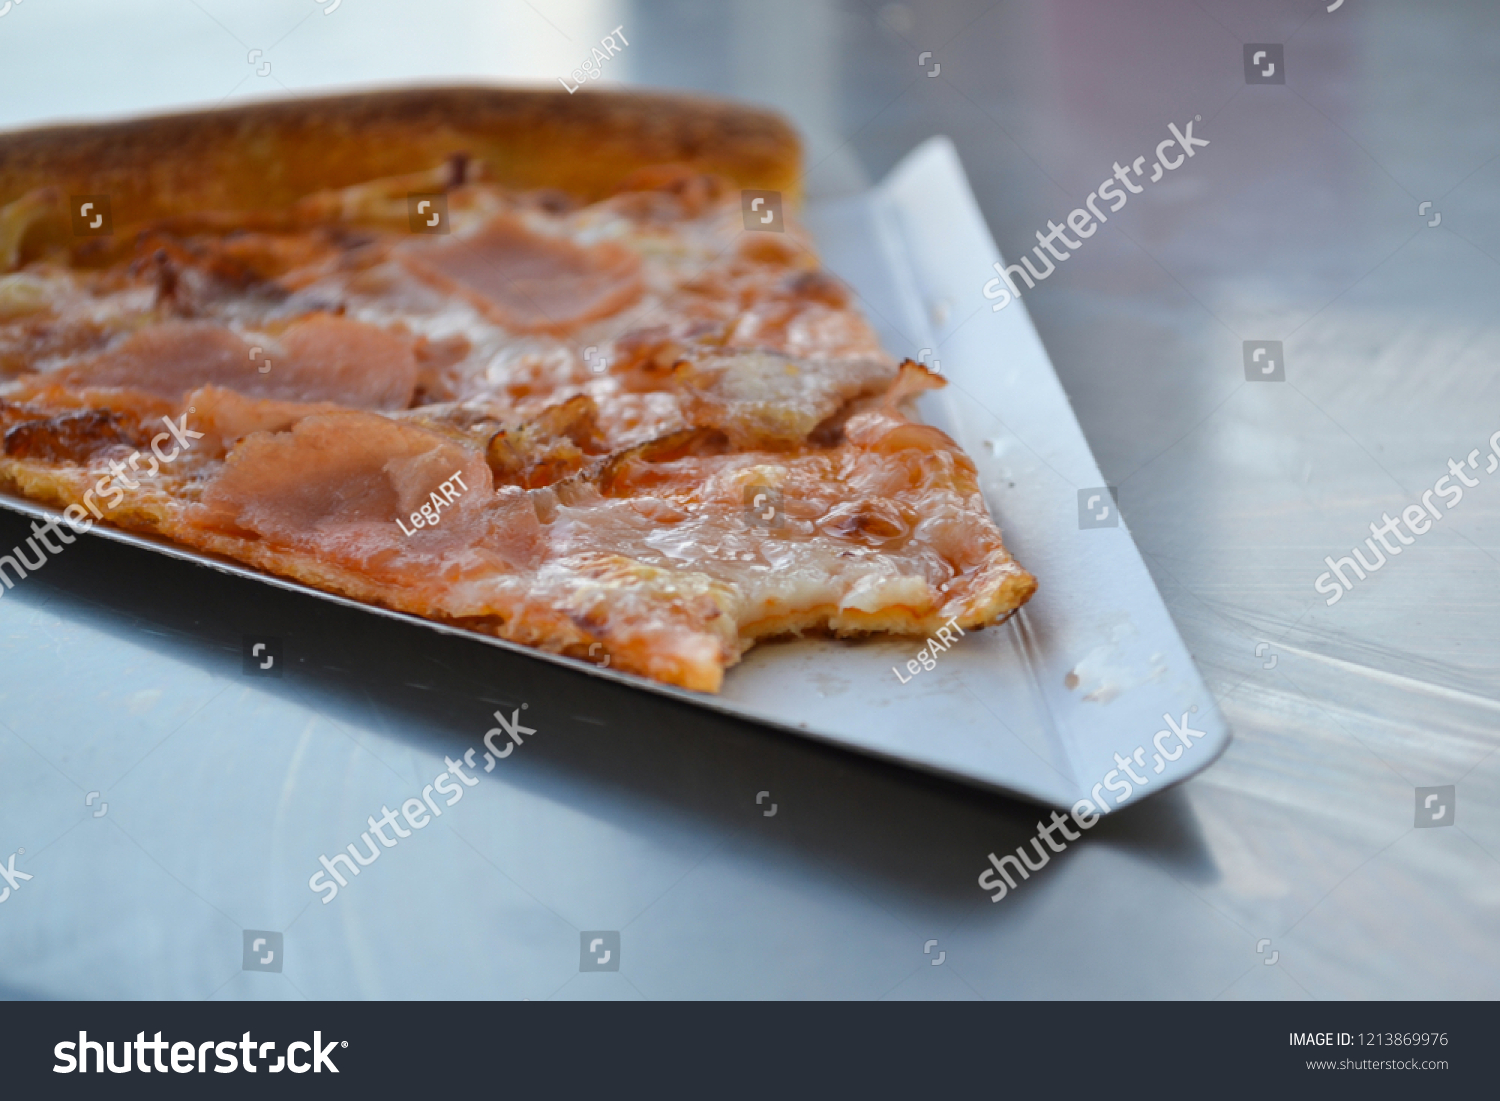 One Piece Pizza On Paper Plate Food And Drink Stock Image